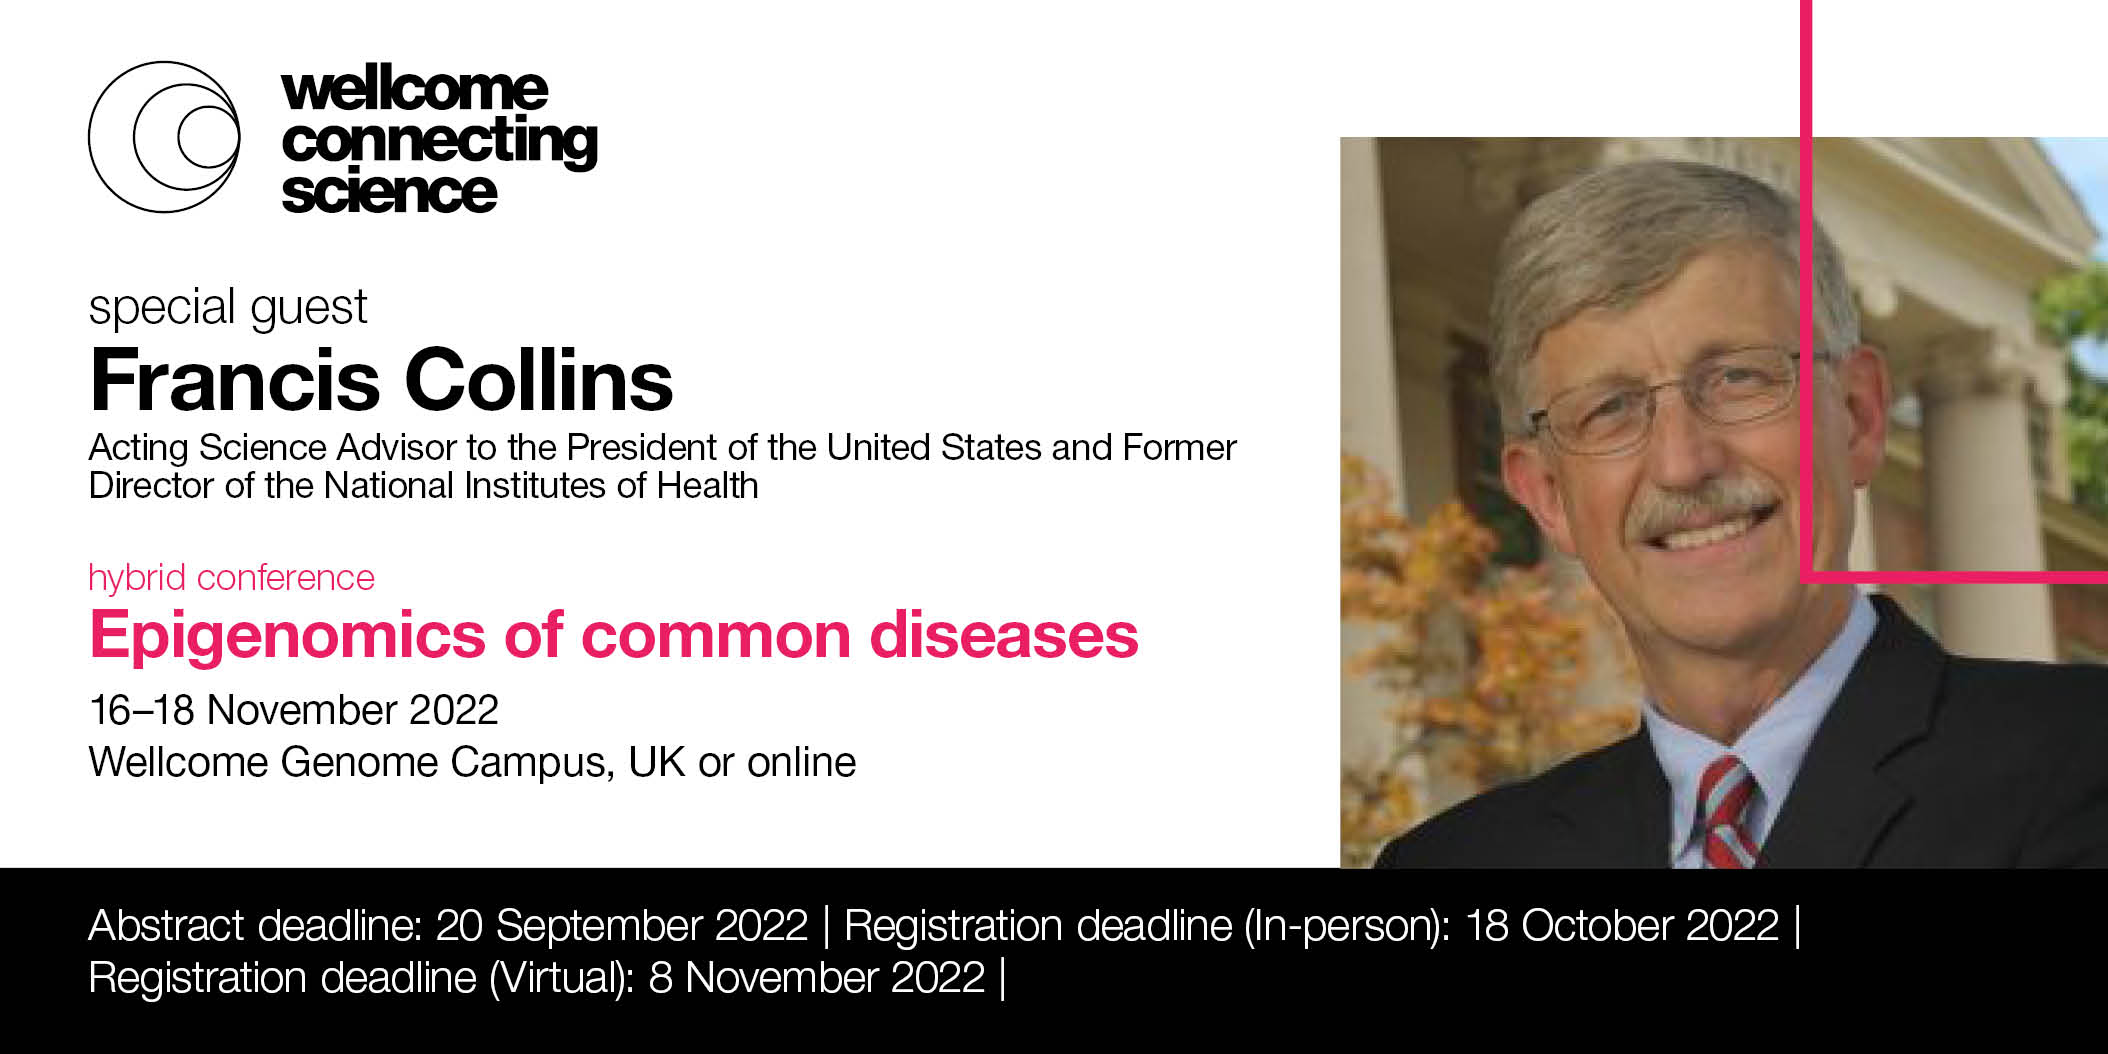 Image shows photo of guest speaker, Francis Collins. Text reads: Wellcome Connecting Science. Special guest speaker, Francis Collins, Acting Advisor to the President of the United States and Former Director of the National Institutes of Health. Hybrid Conference, Epigenomics of Common Diseases. Conference dates: 16-18 November 2022. Register for an in-person place by 18 October 2022